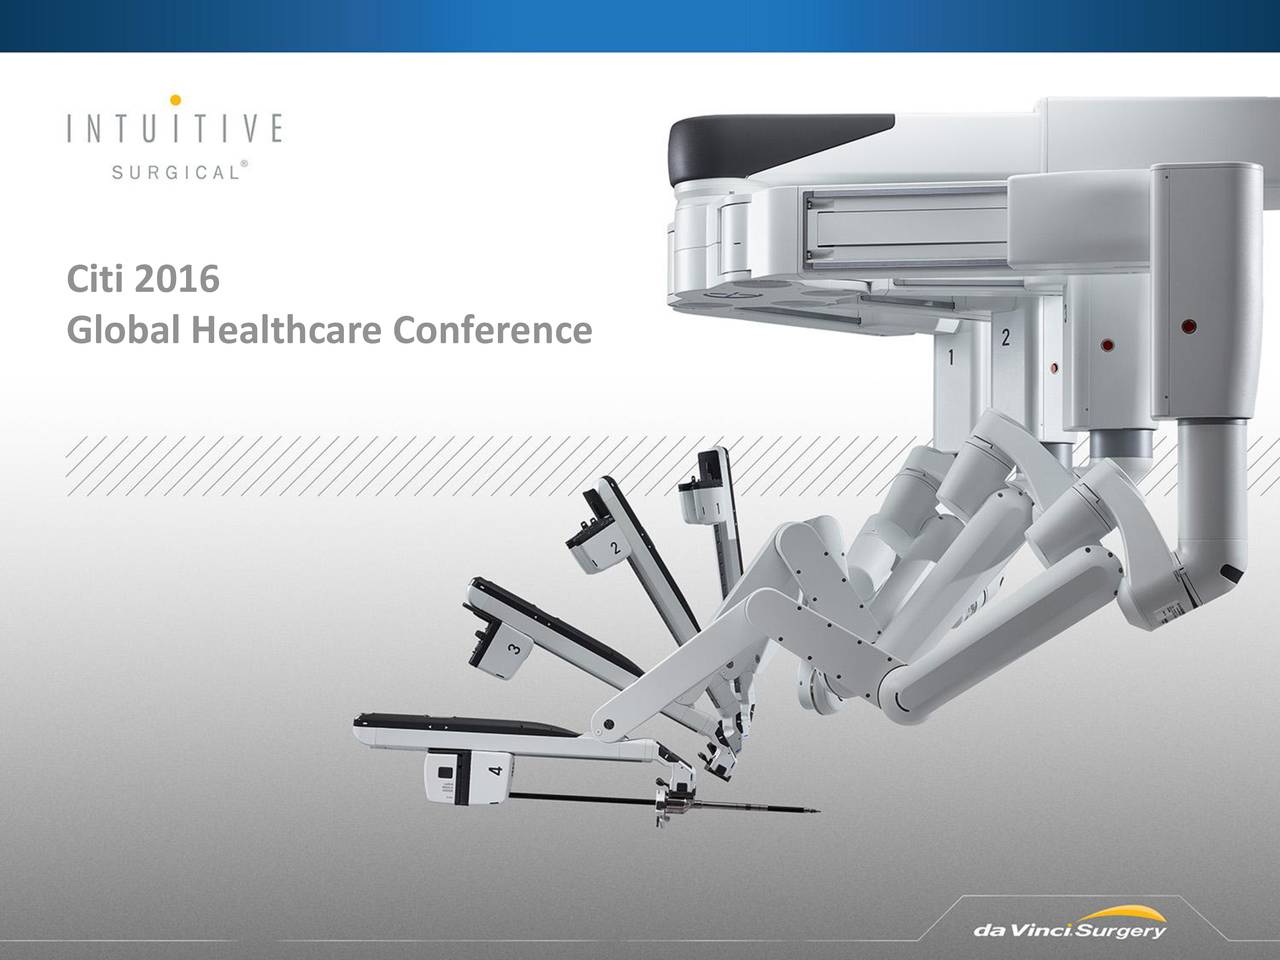 Intuitive Surgical (ISRG) presents at Citi Global Healthcare Conference